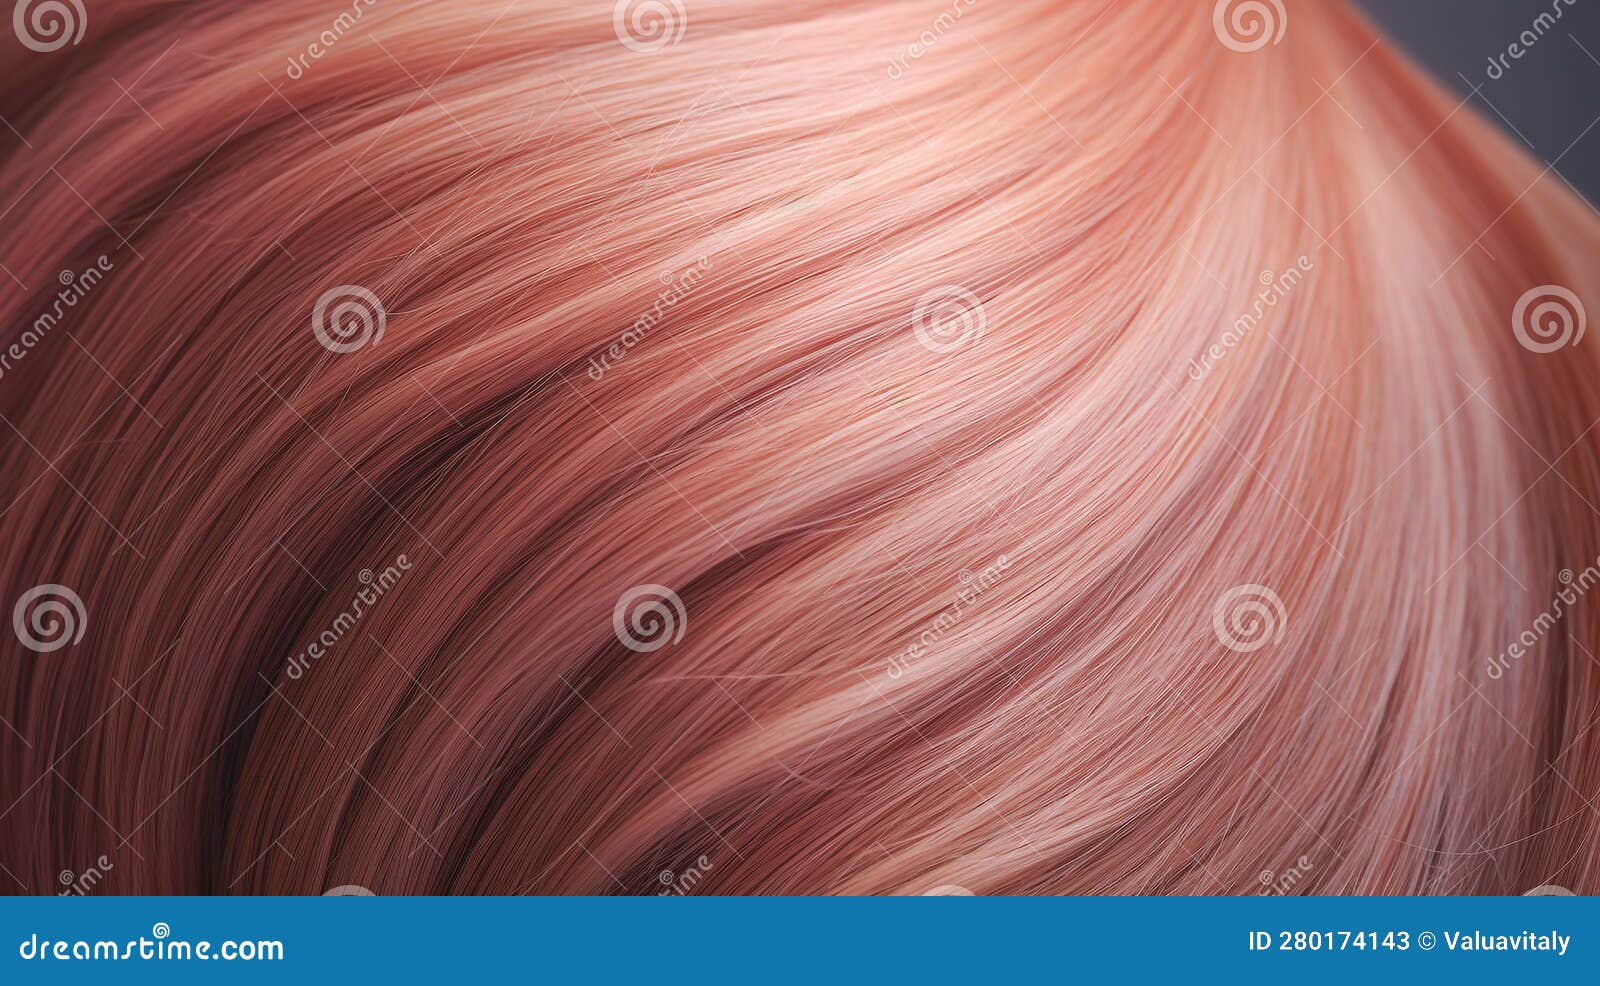 Light Red Hair - wide 8